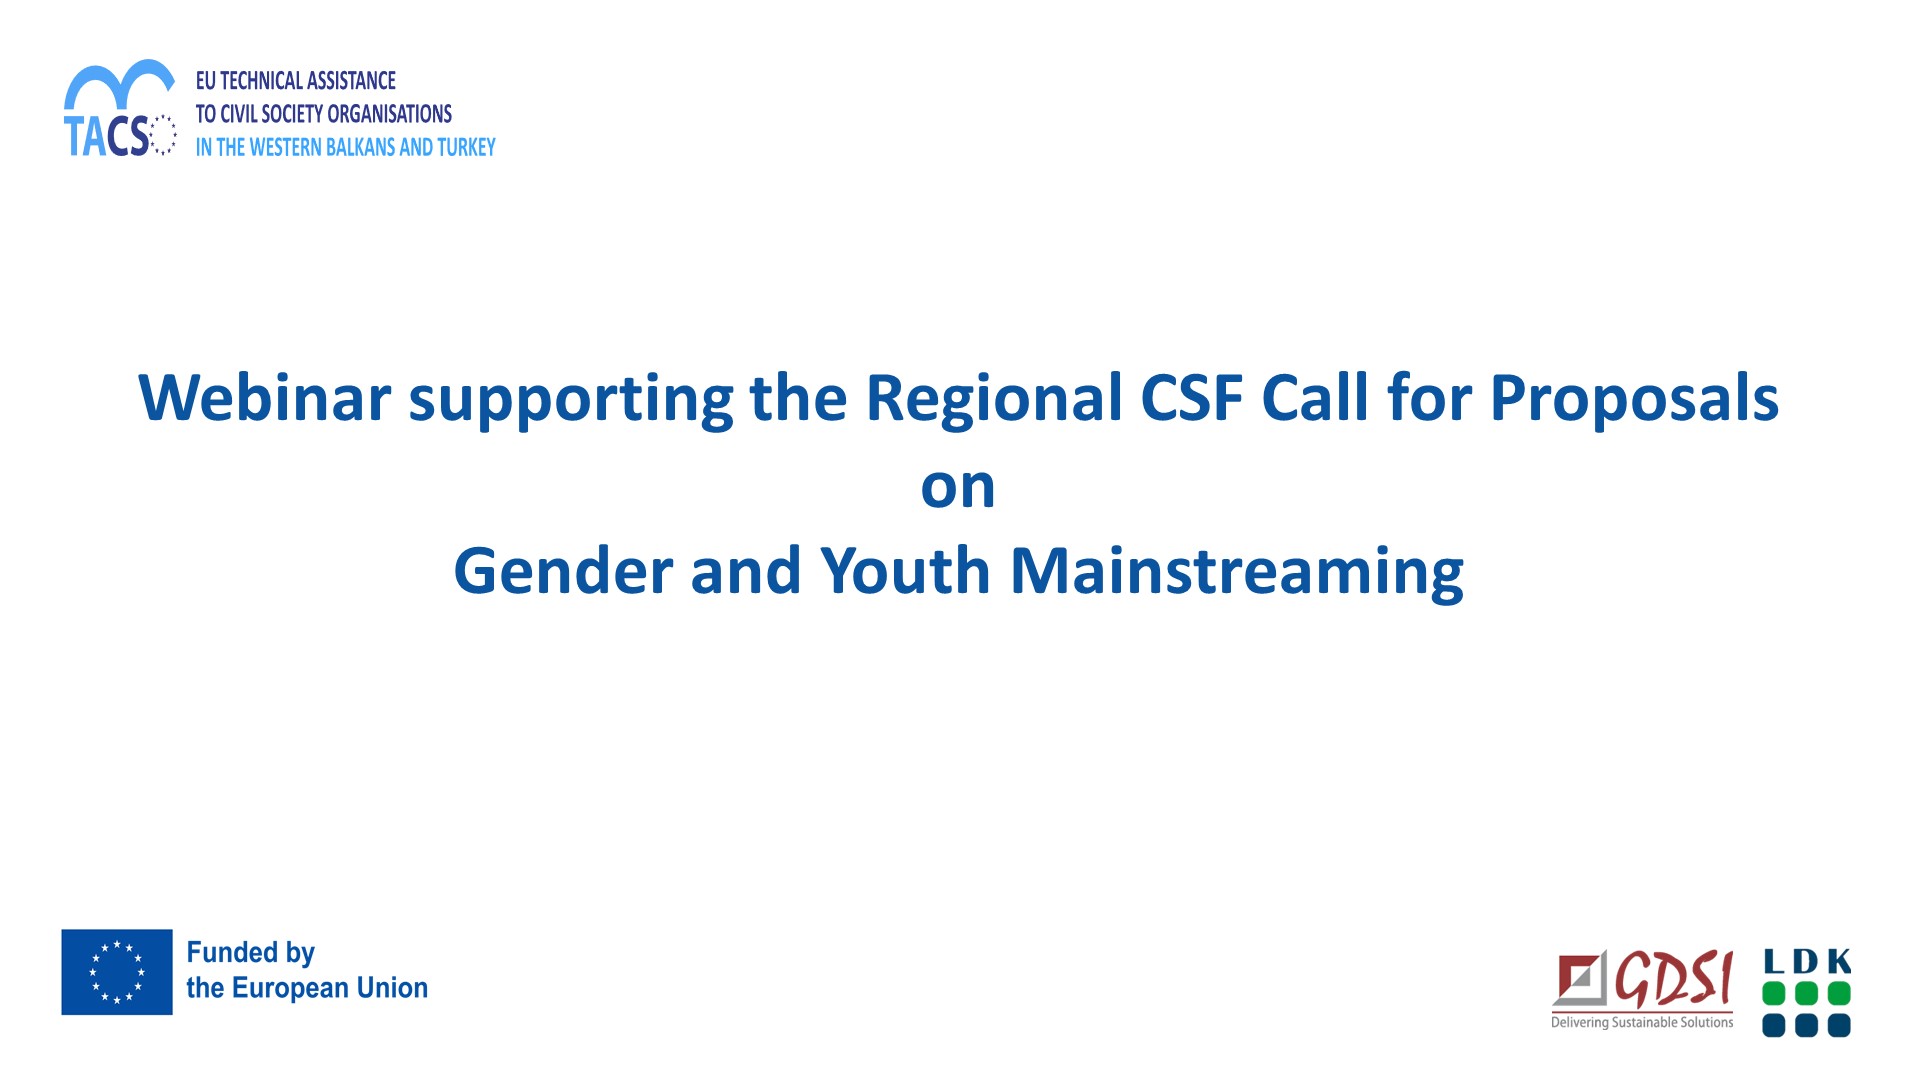 Webinar on Gender and Youth Mainstreaming